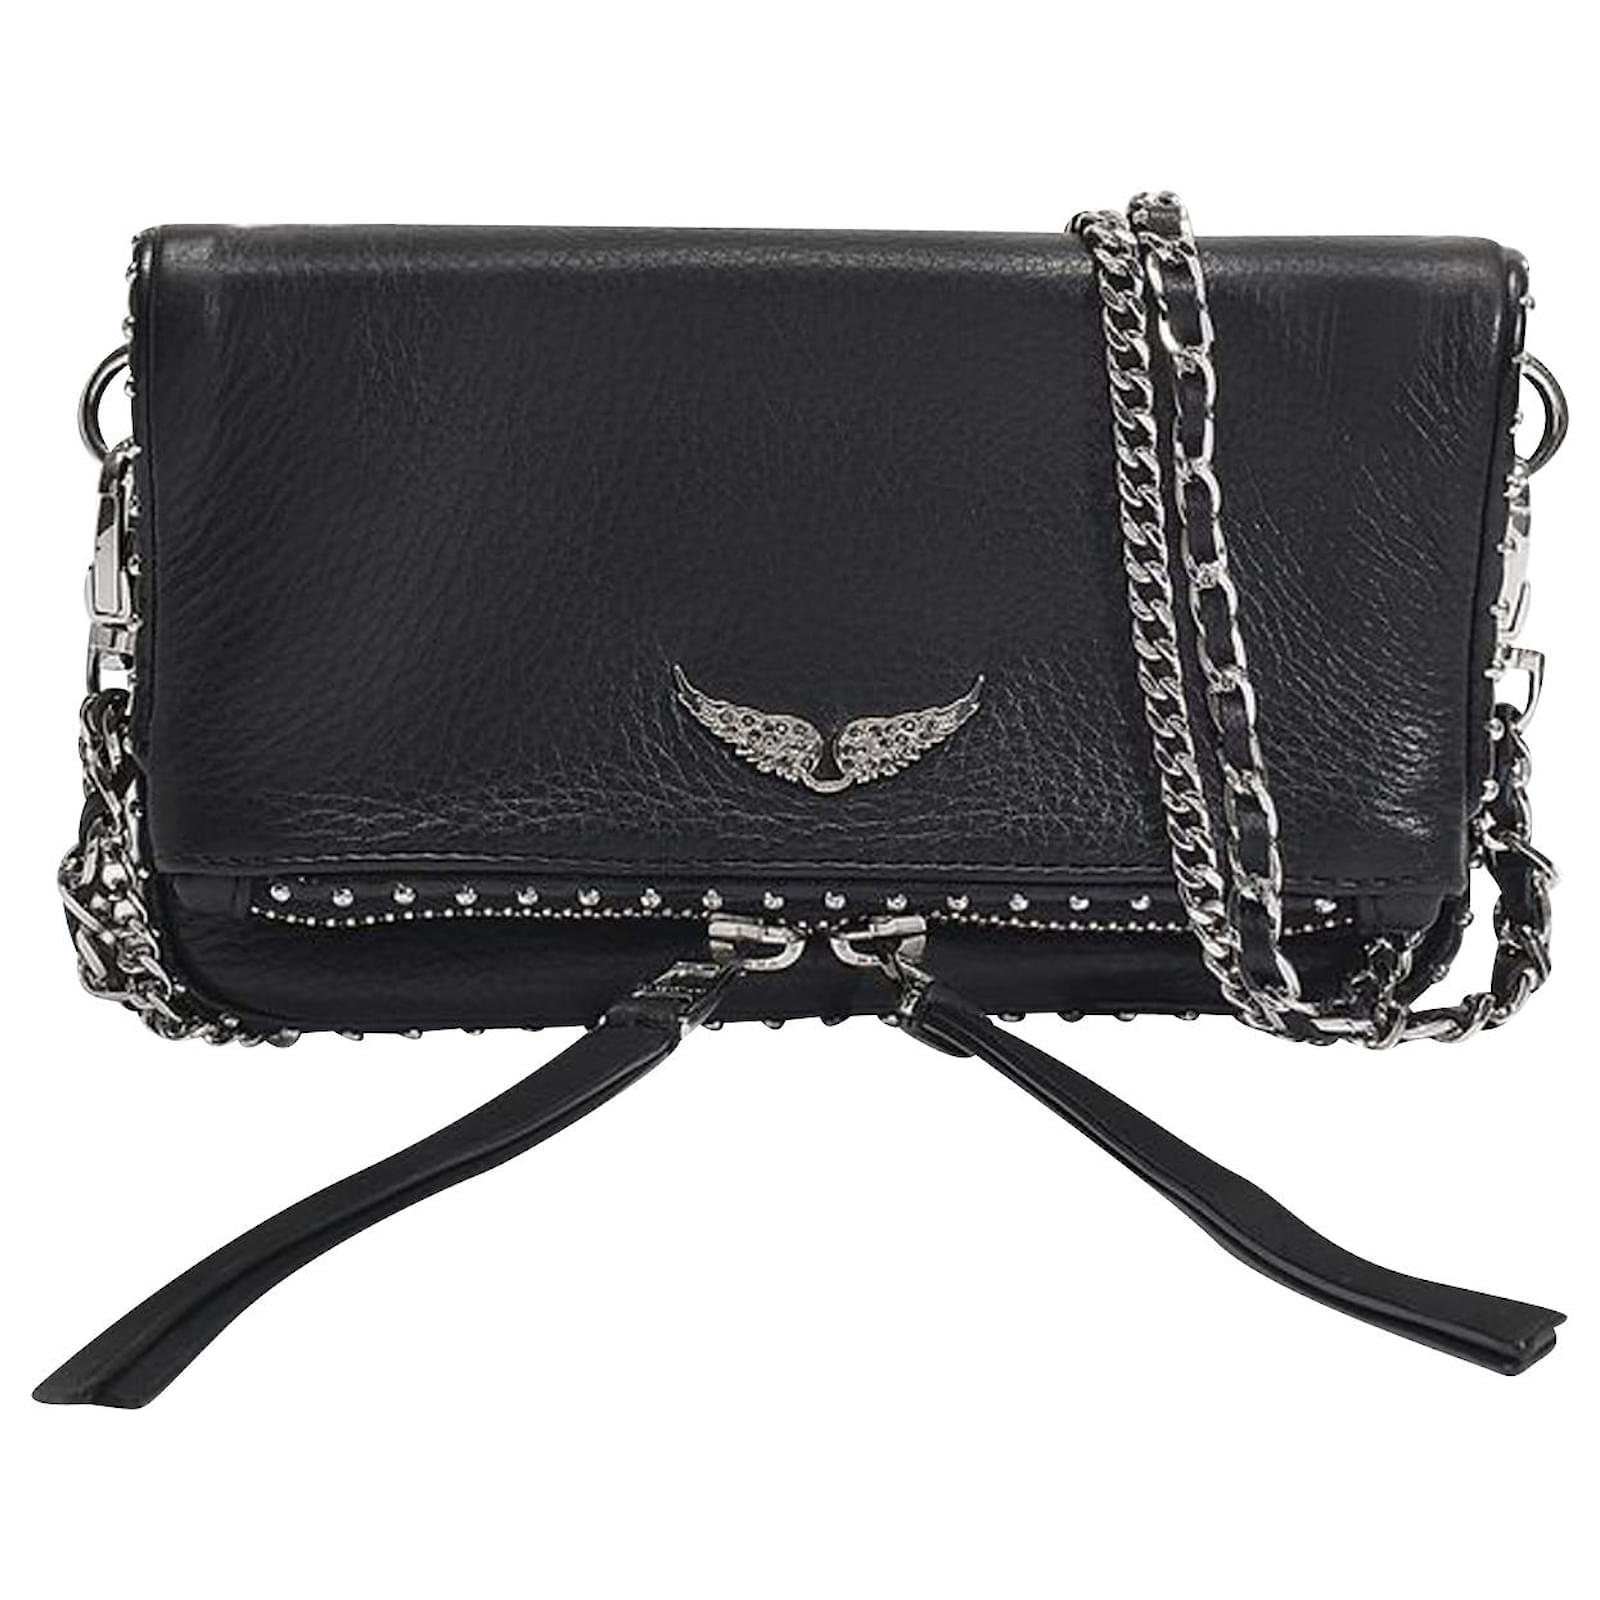 Zadig & Voltaire Rock Nano Bag in Black Grained Leather Pony-style ...